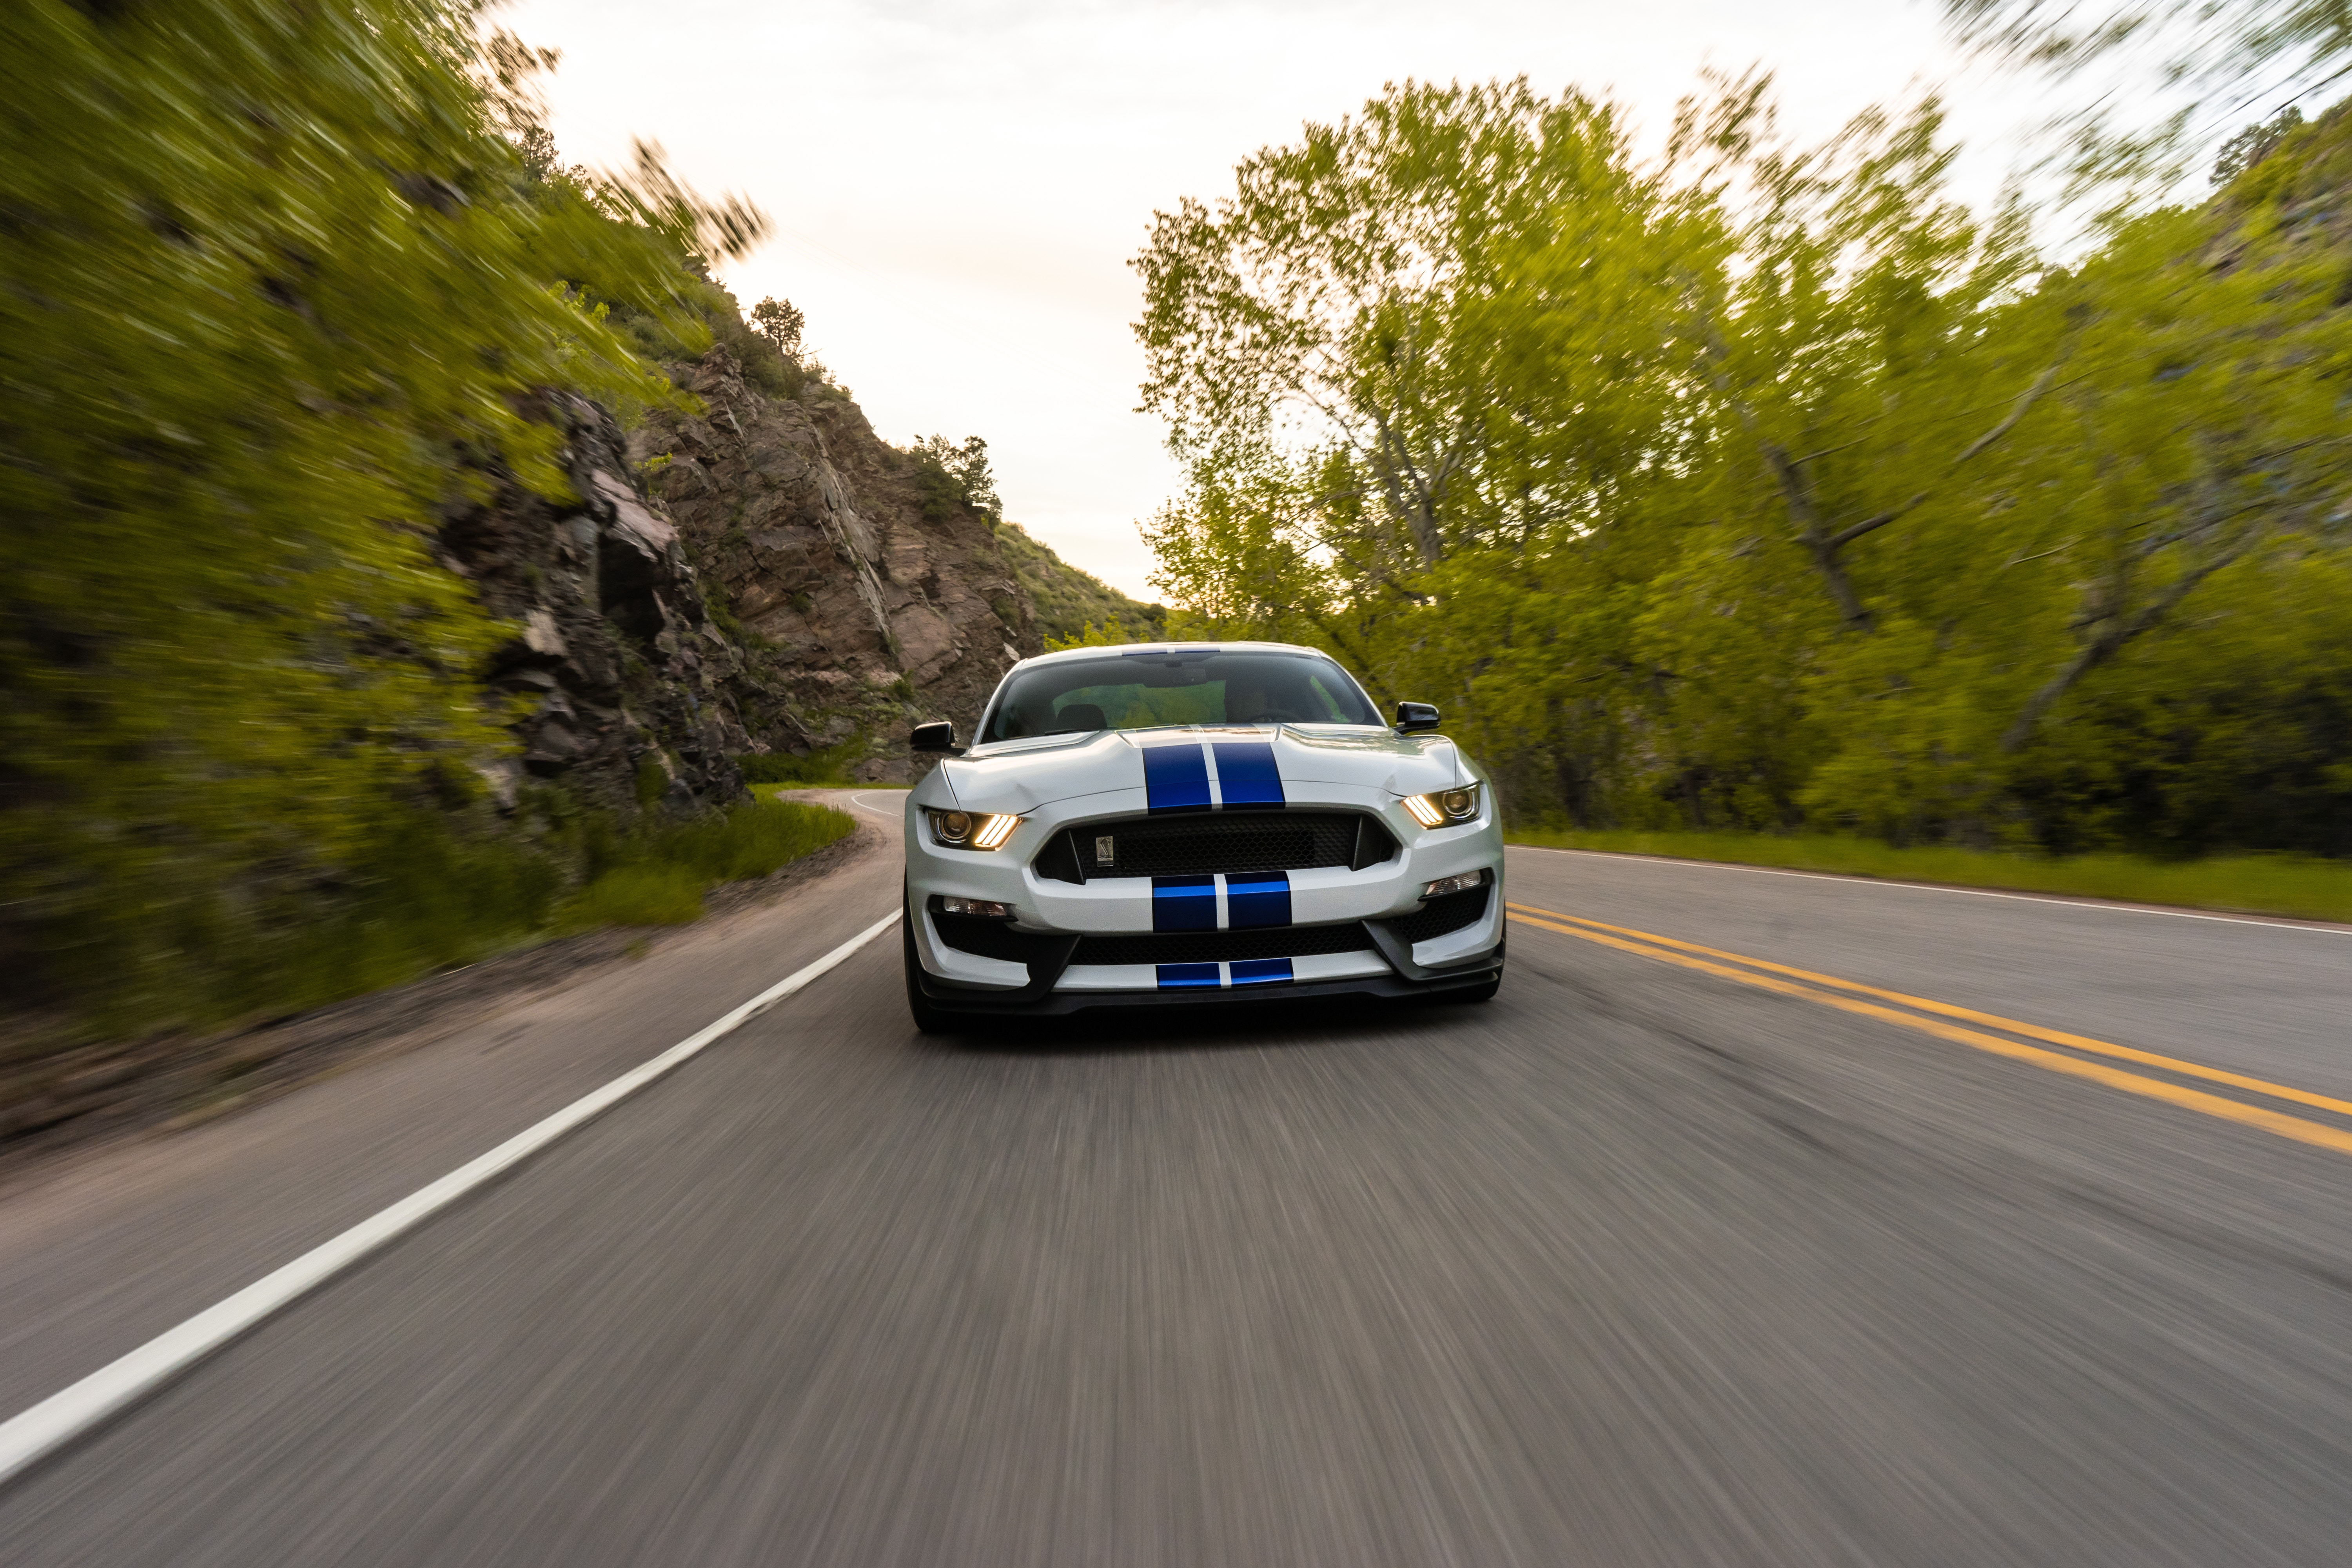 cars, sports car, car, road, speed, ford mustang gt350, sports, ford, machine